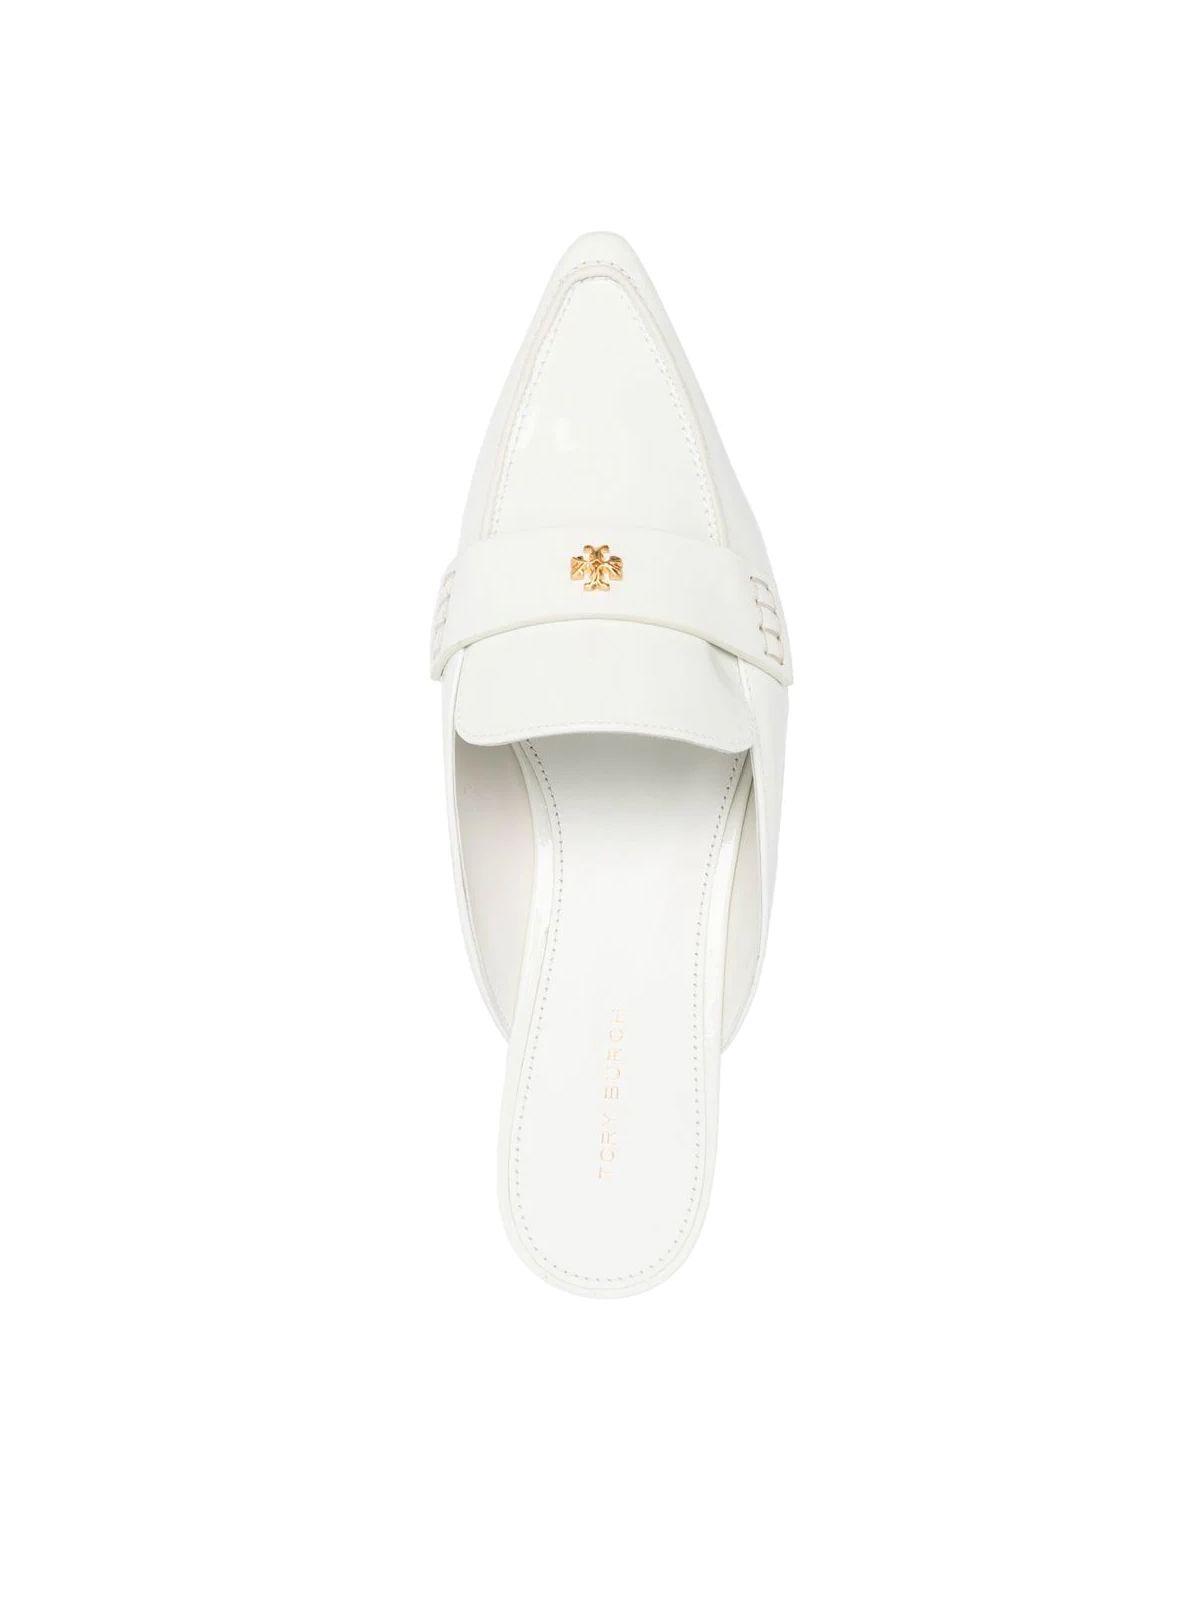 Shop Tory Burch Pointed Ballet Loafer Mule